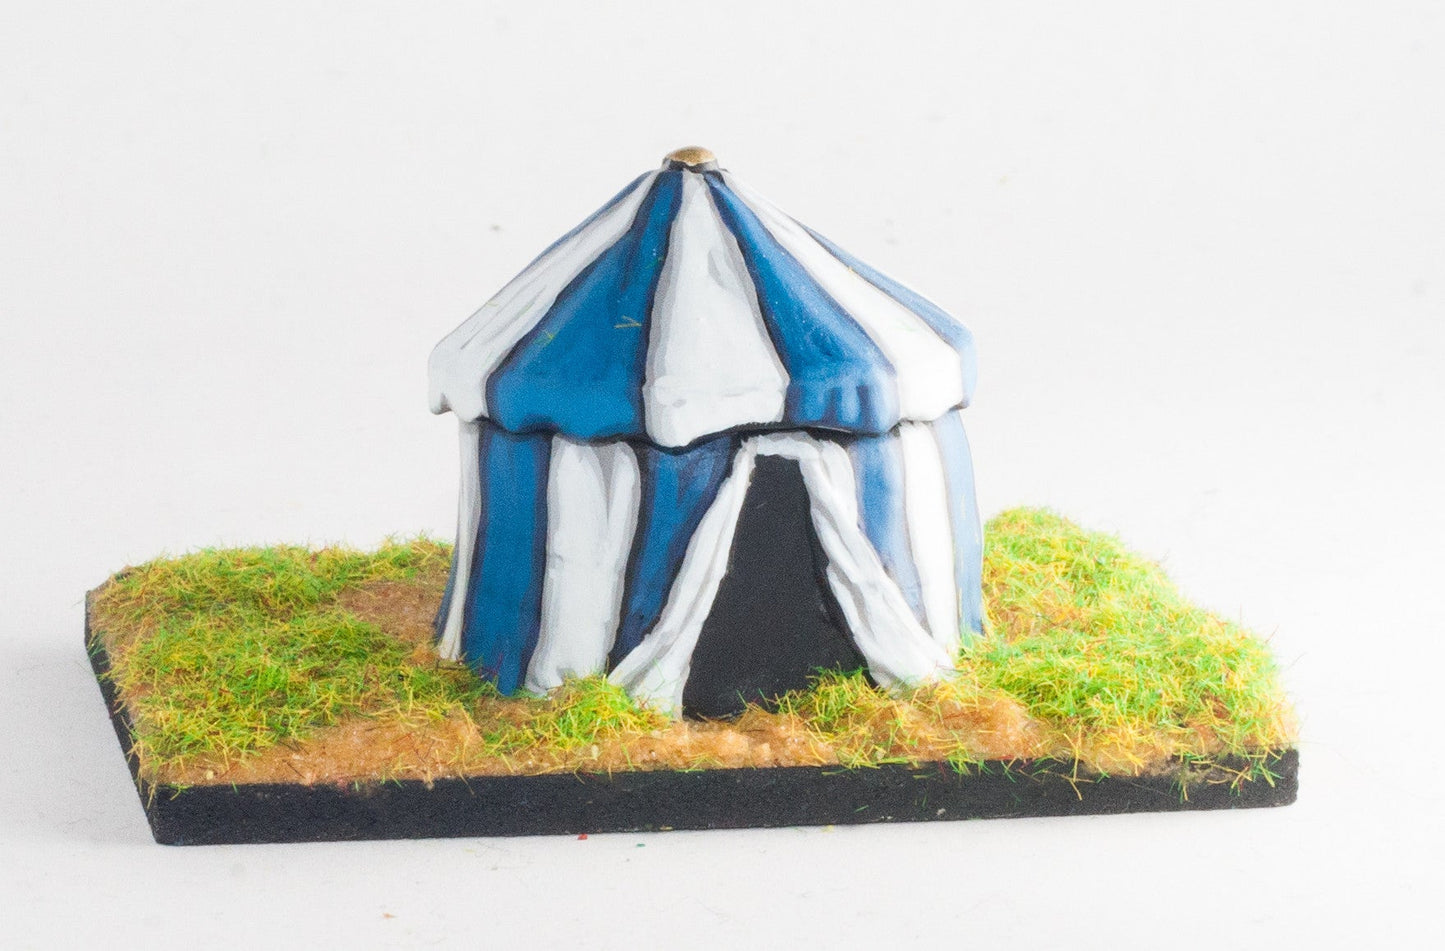 Camps: Two Piece Medieval Tent TT22